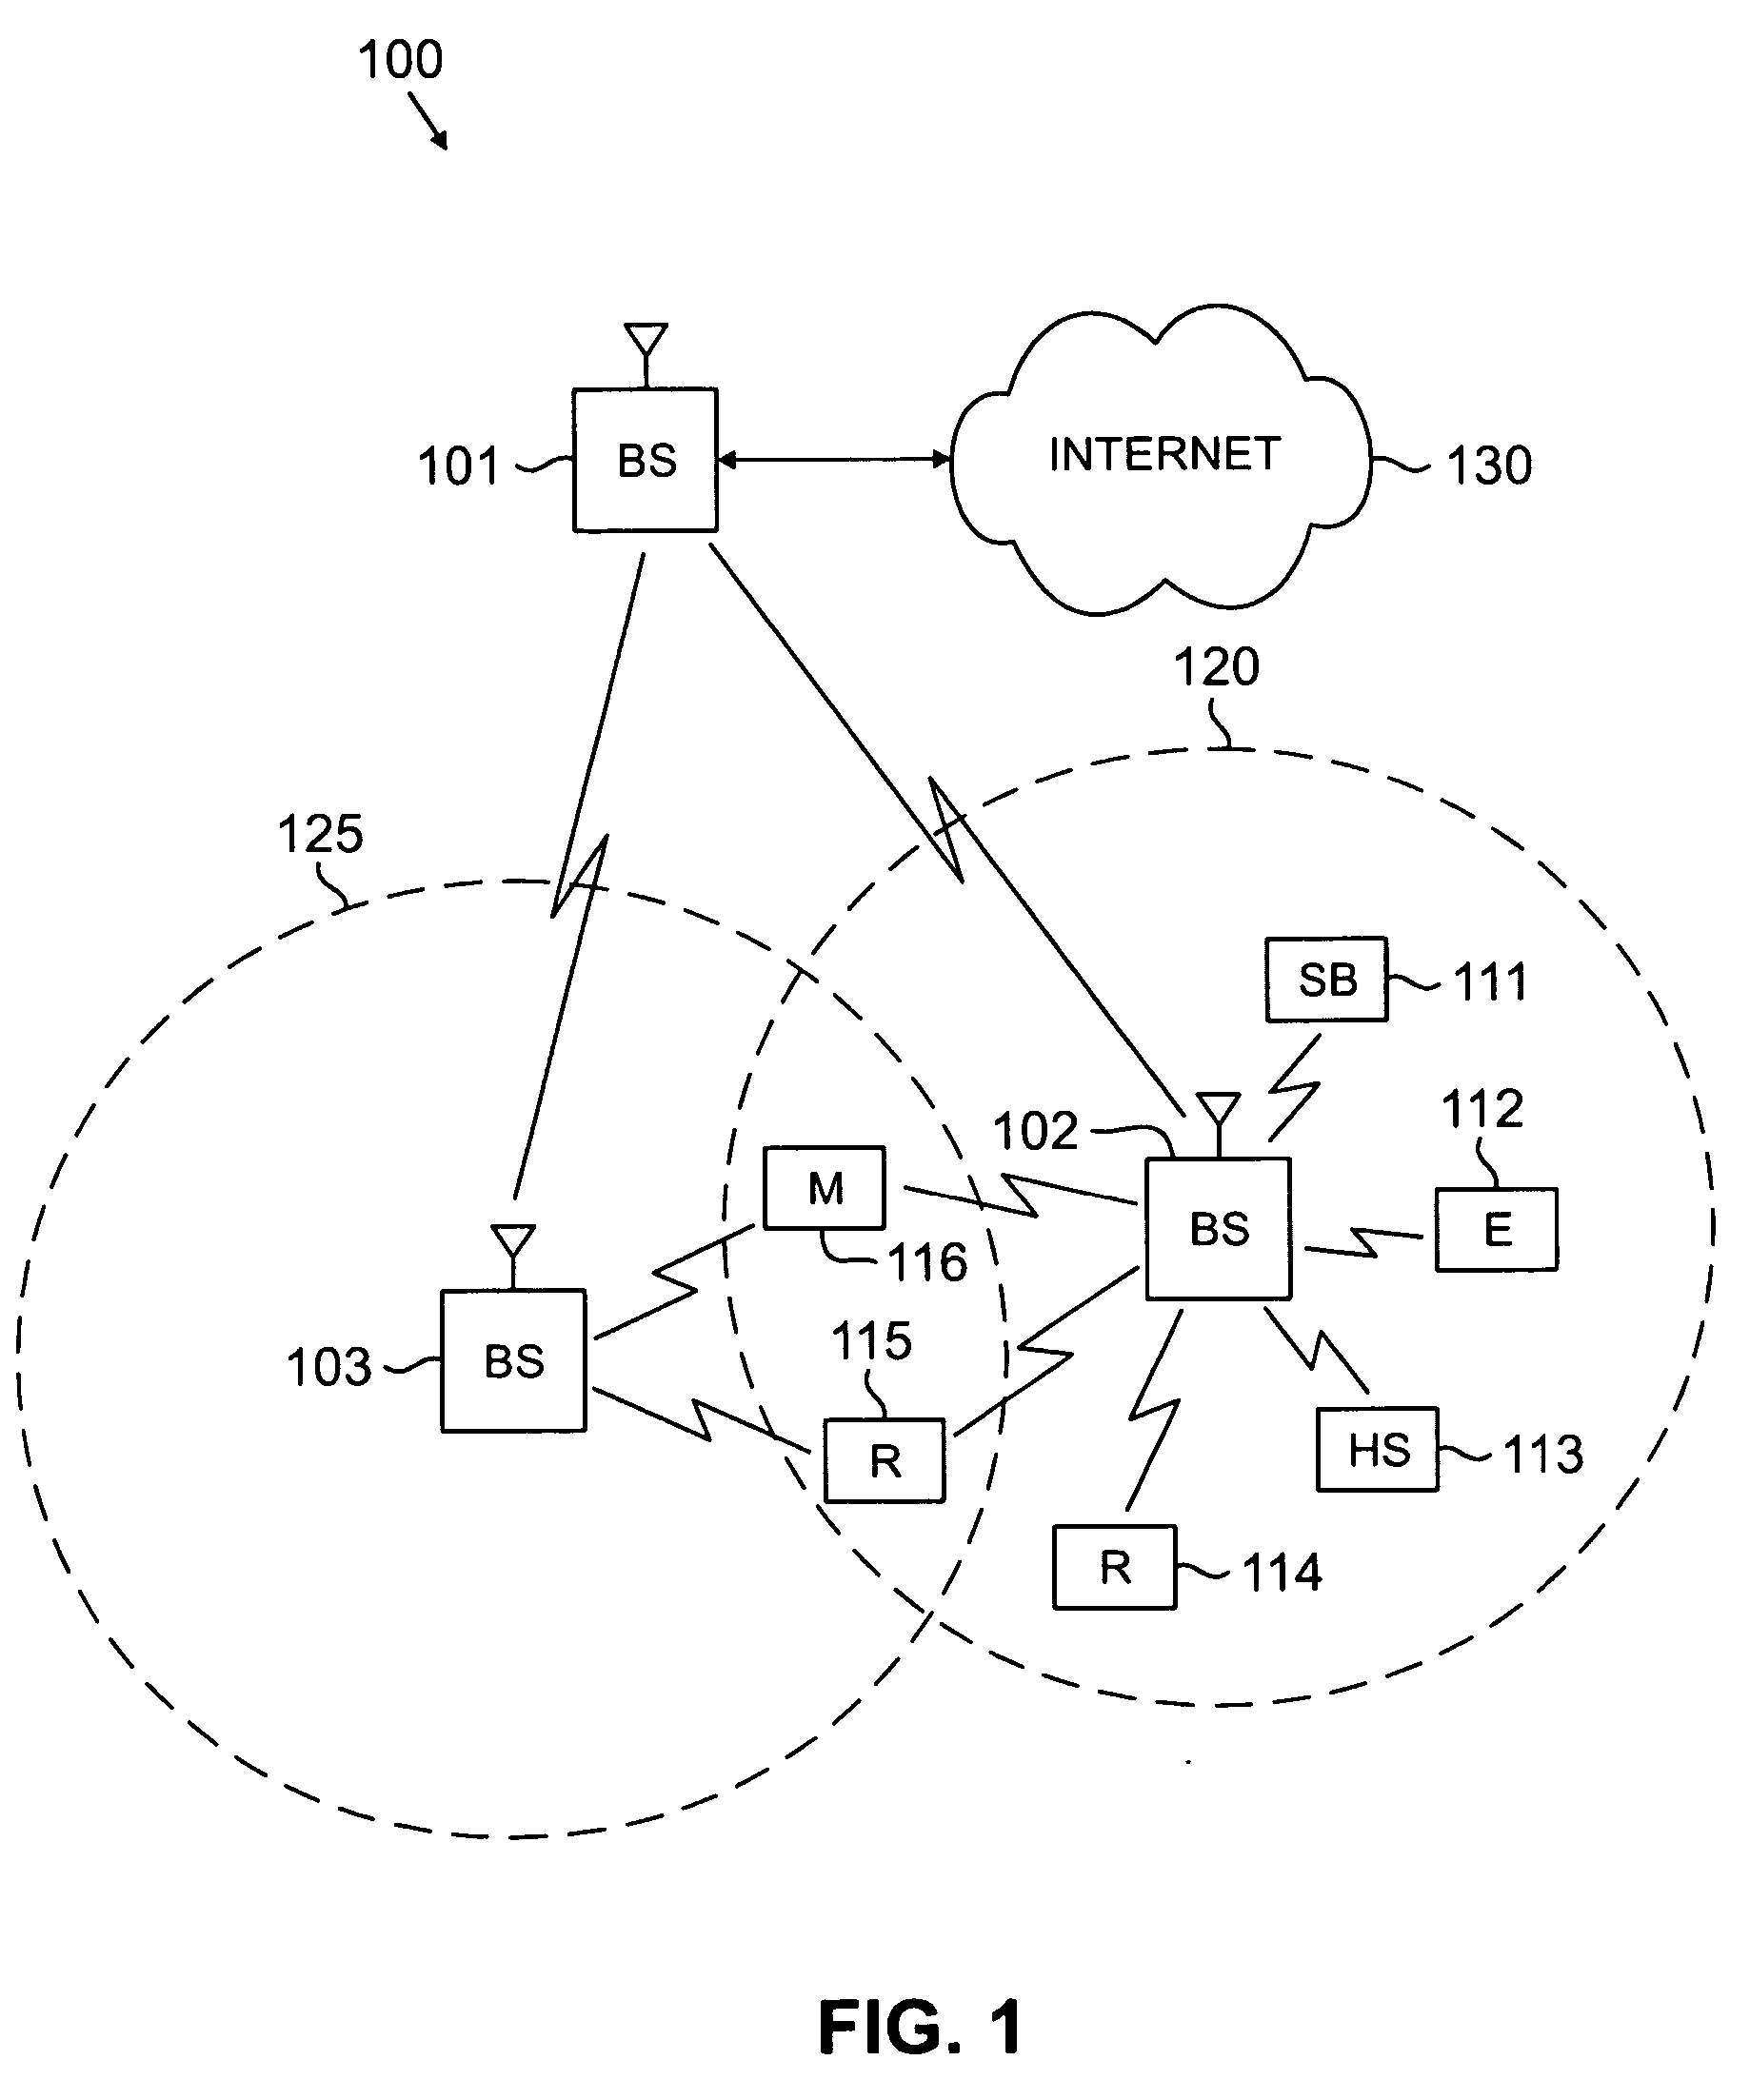 Apparatus and method for FT pre-coding of data and control signals to reduce PAPR in a multi-carrier wireless network